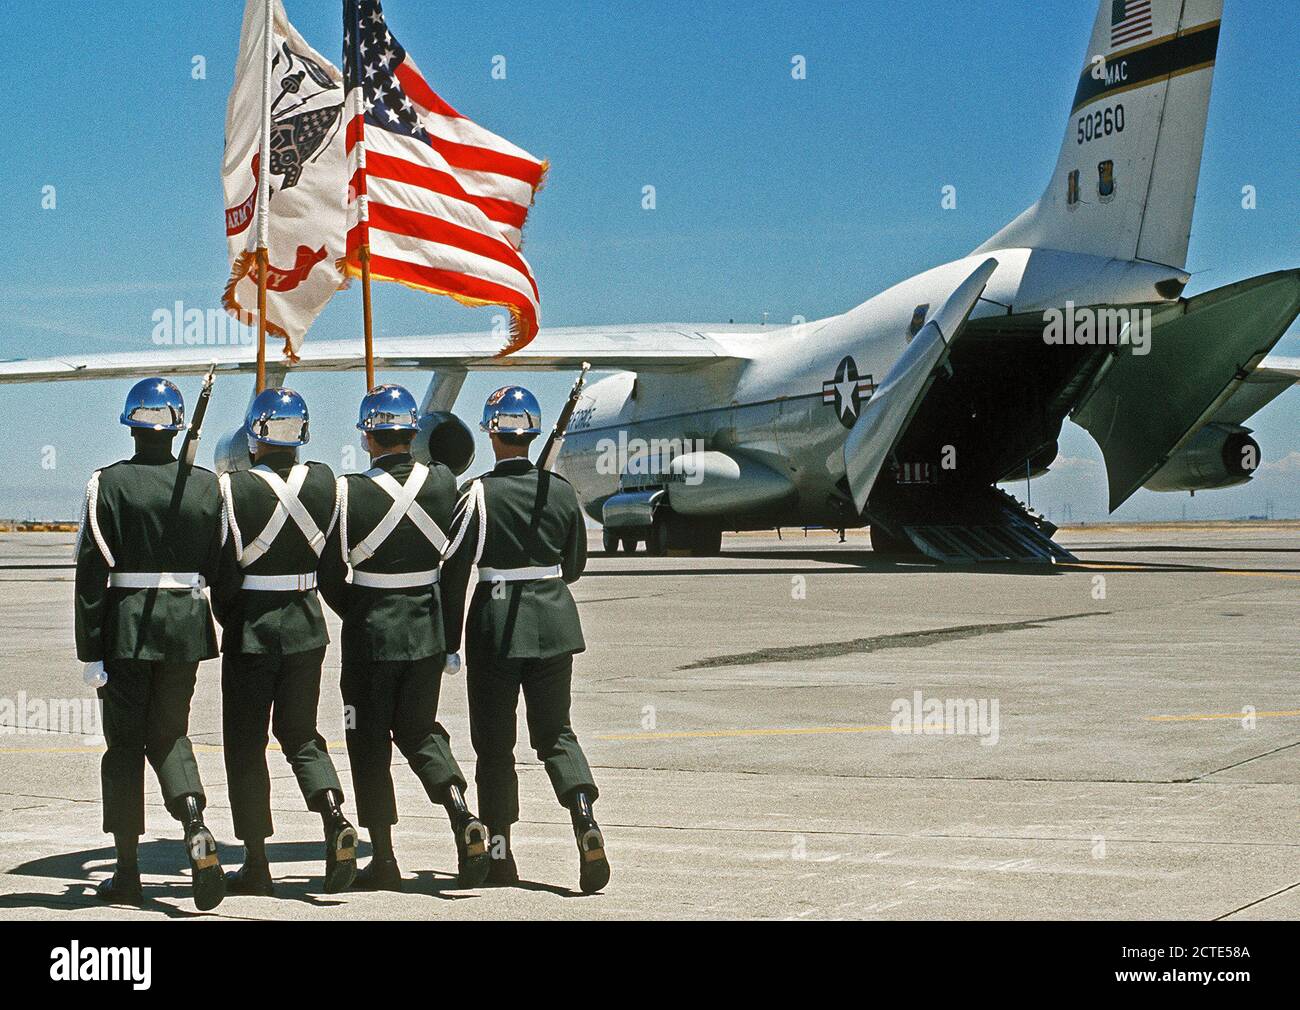 1977 - An Army color guard marches out to meet a C-141 Starlifter aircraft carrying the caskets of three U.S. Army soldiers who were killed in a helicopter crash in Korea on July 14, 1977. Stock Photo